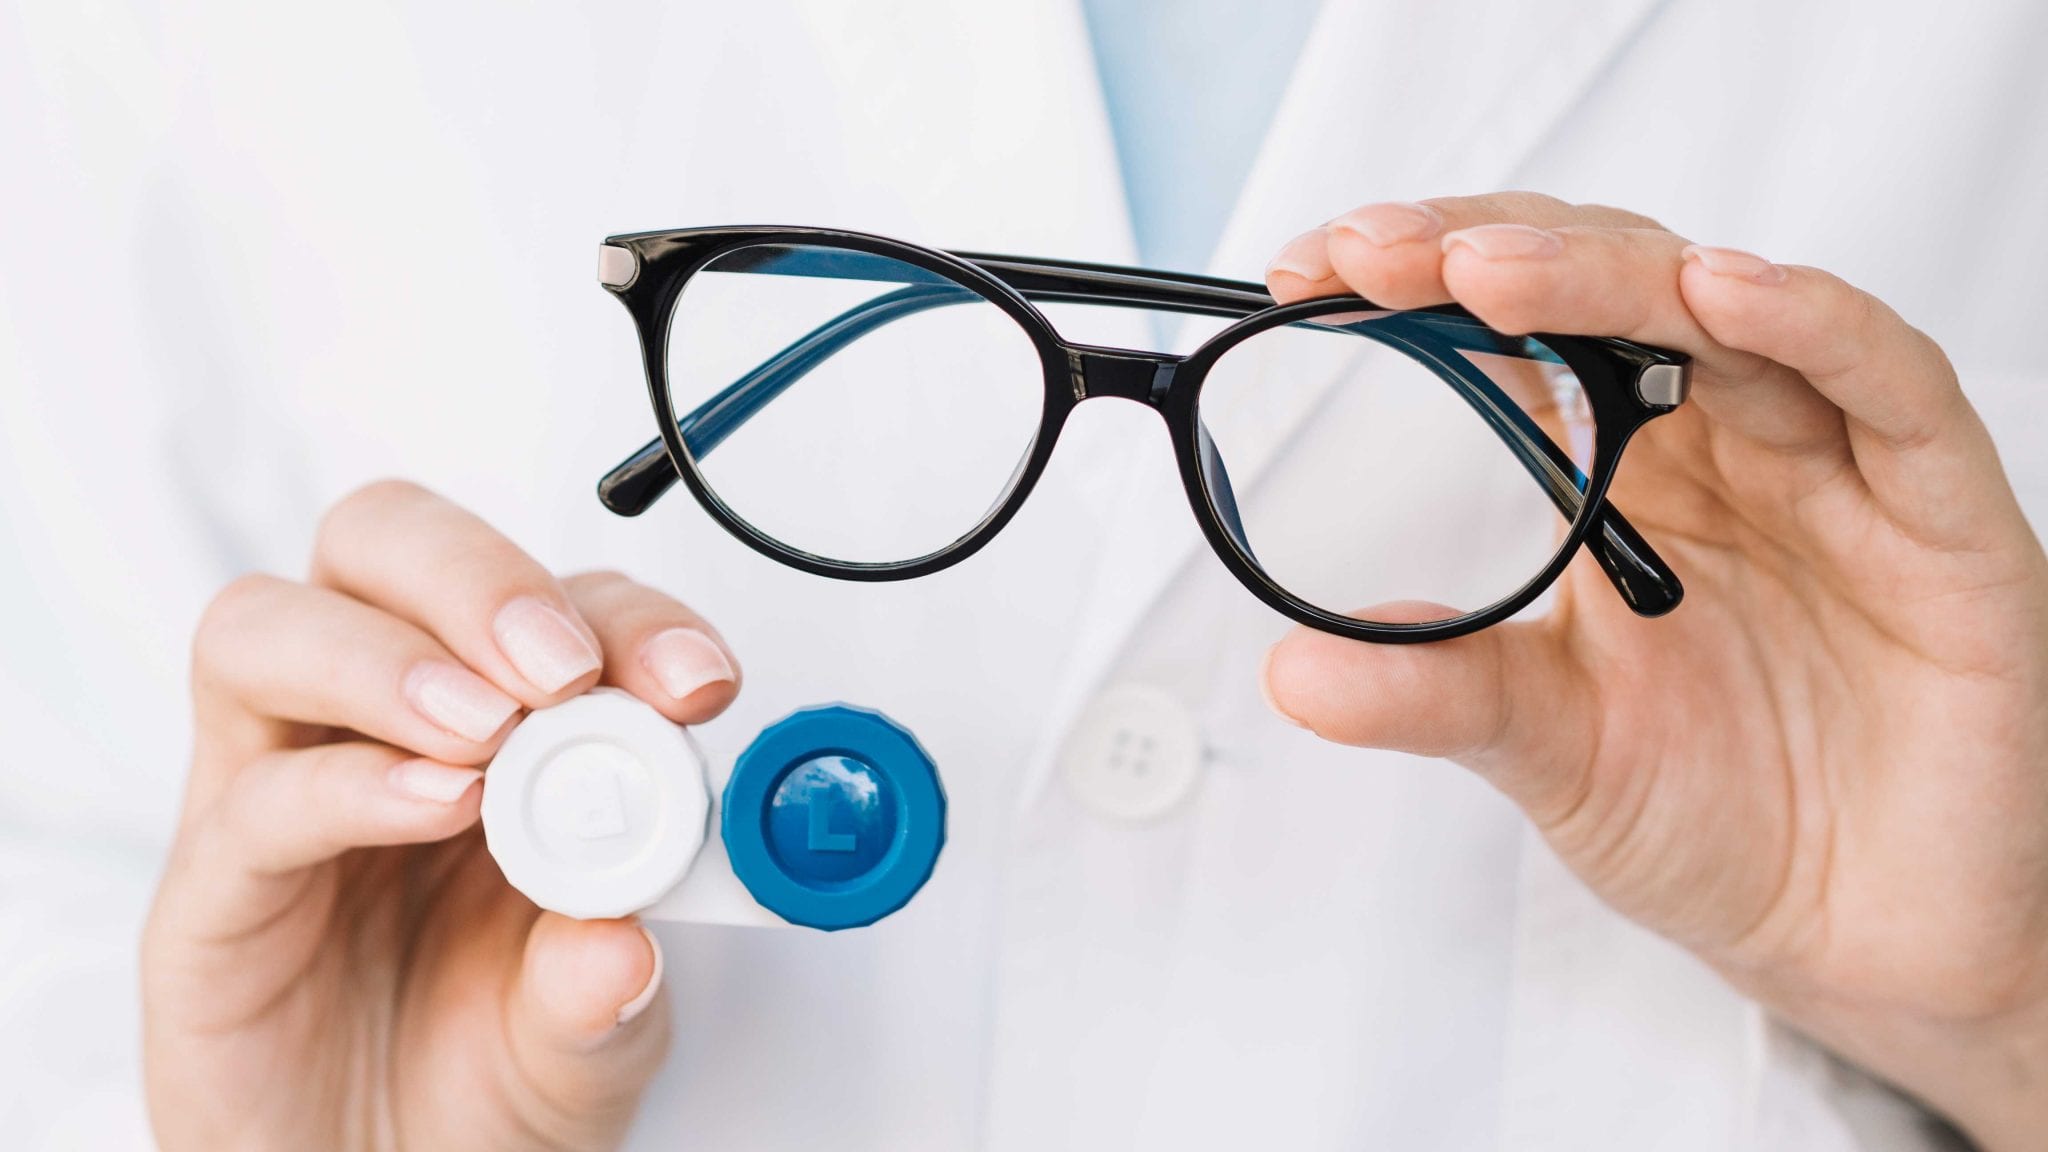 Eye-Doctors suggest people switch from lenses to glasses to avoid COVID-19